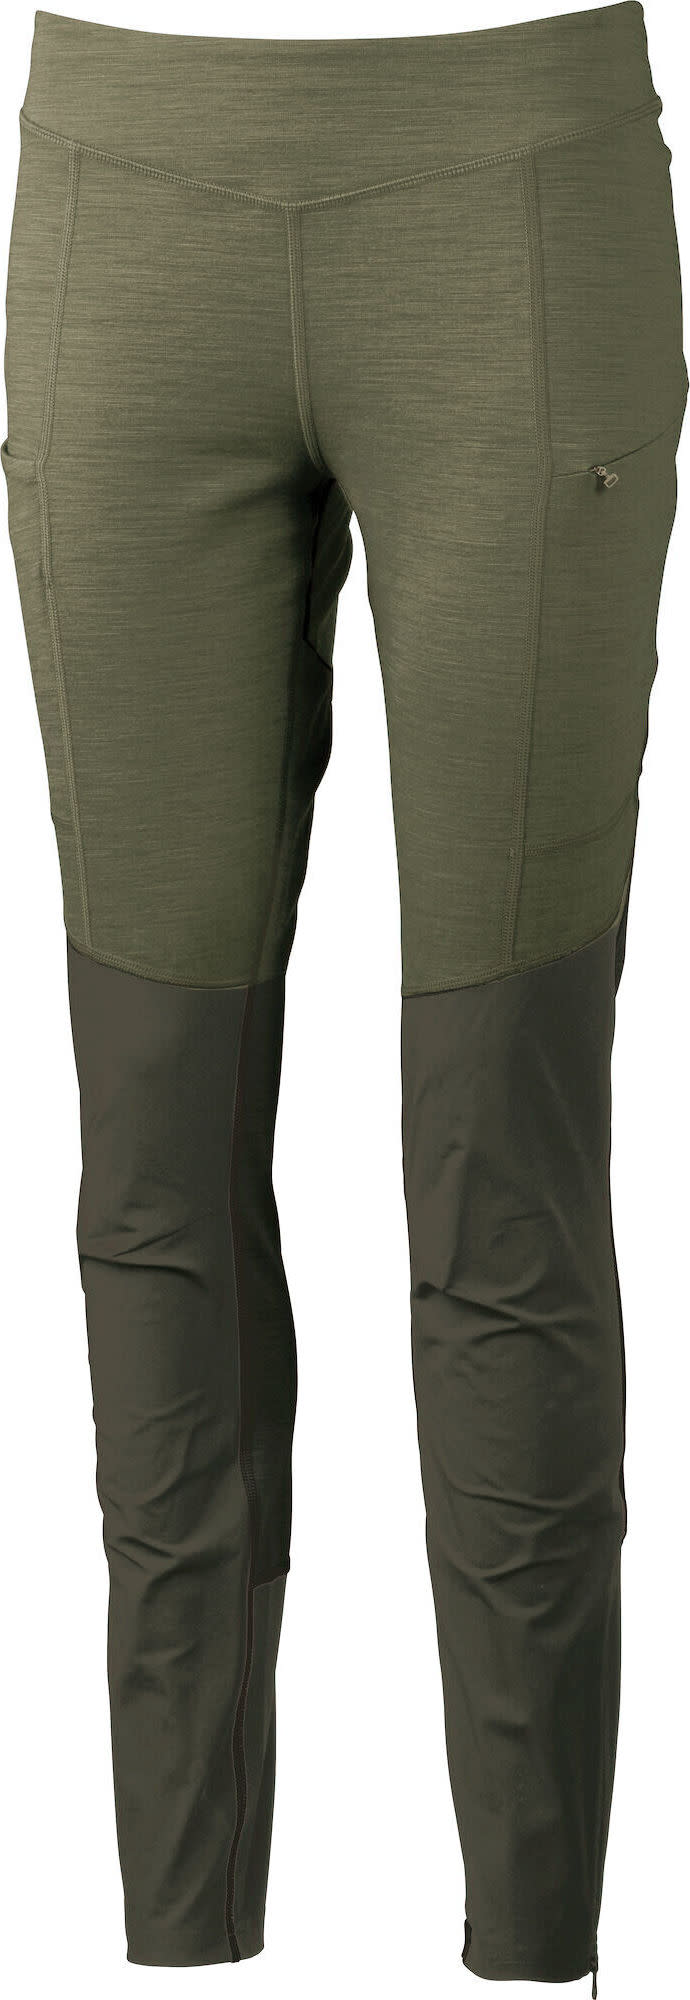 Women's Tausa Tight Clover/Forest Green